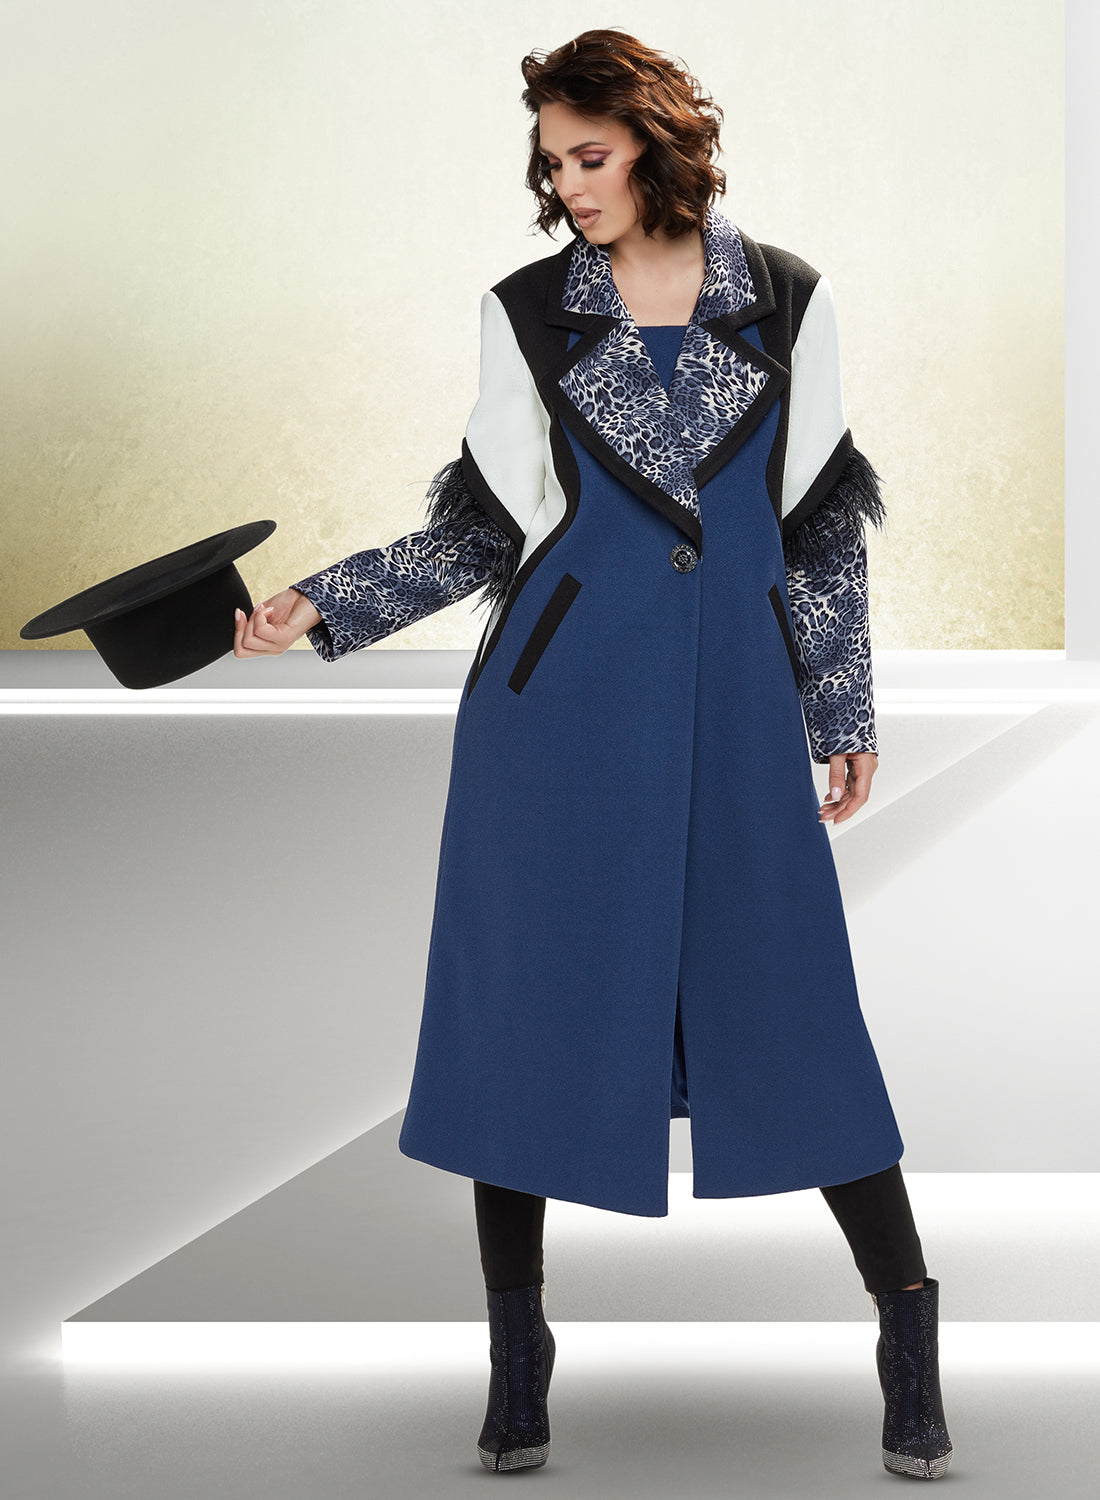 Love The Queen 17426 - Crepe Fabric Coat with Animal Print Trim and Feathers